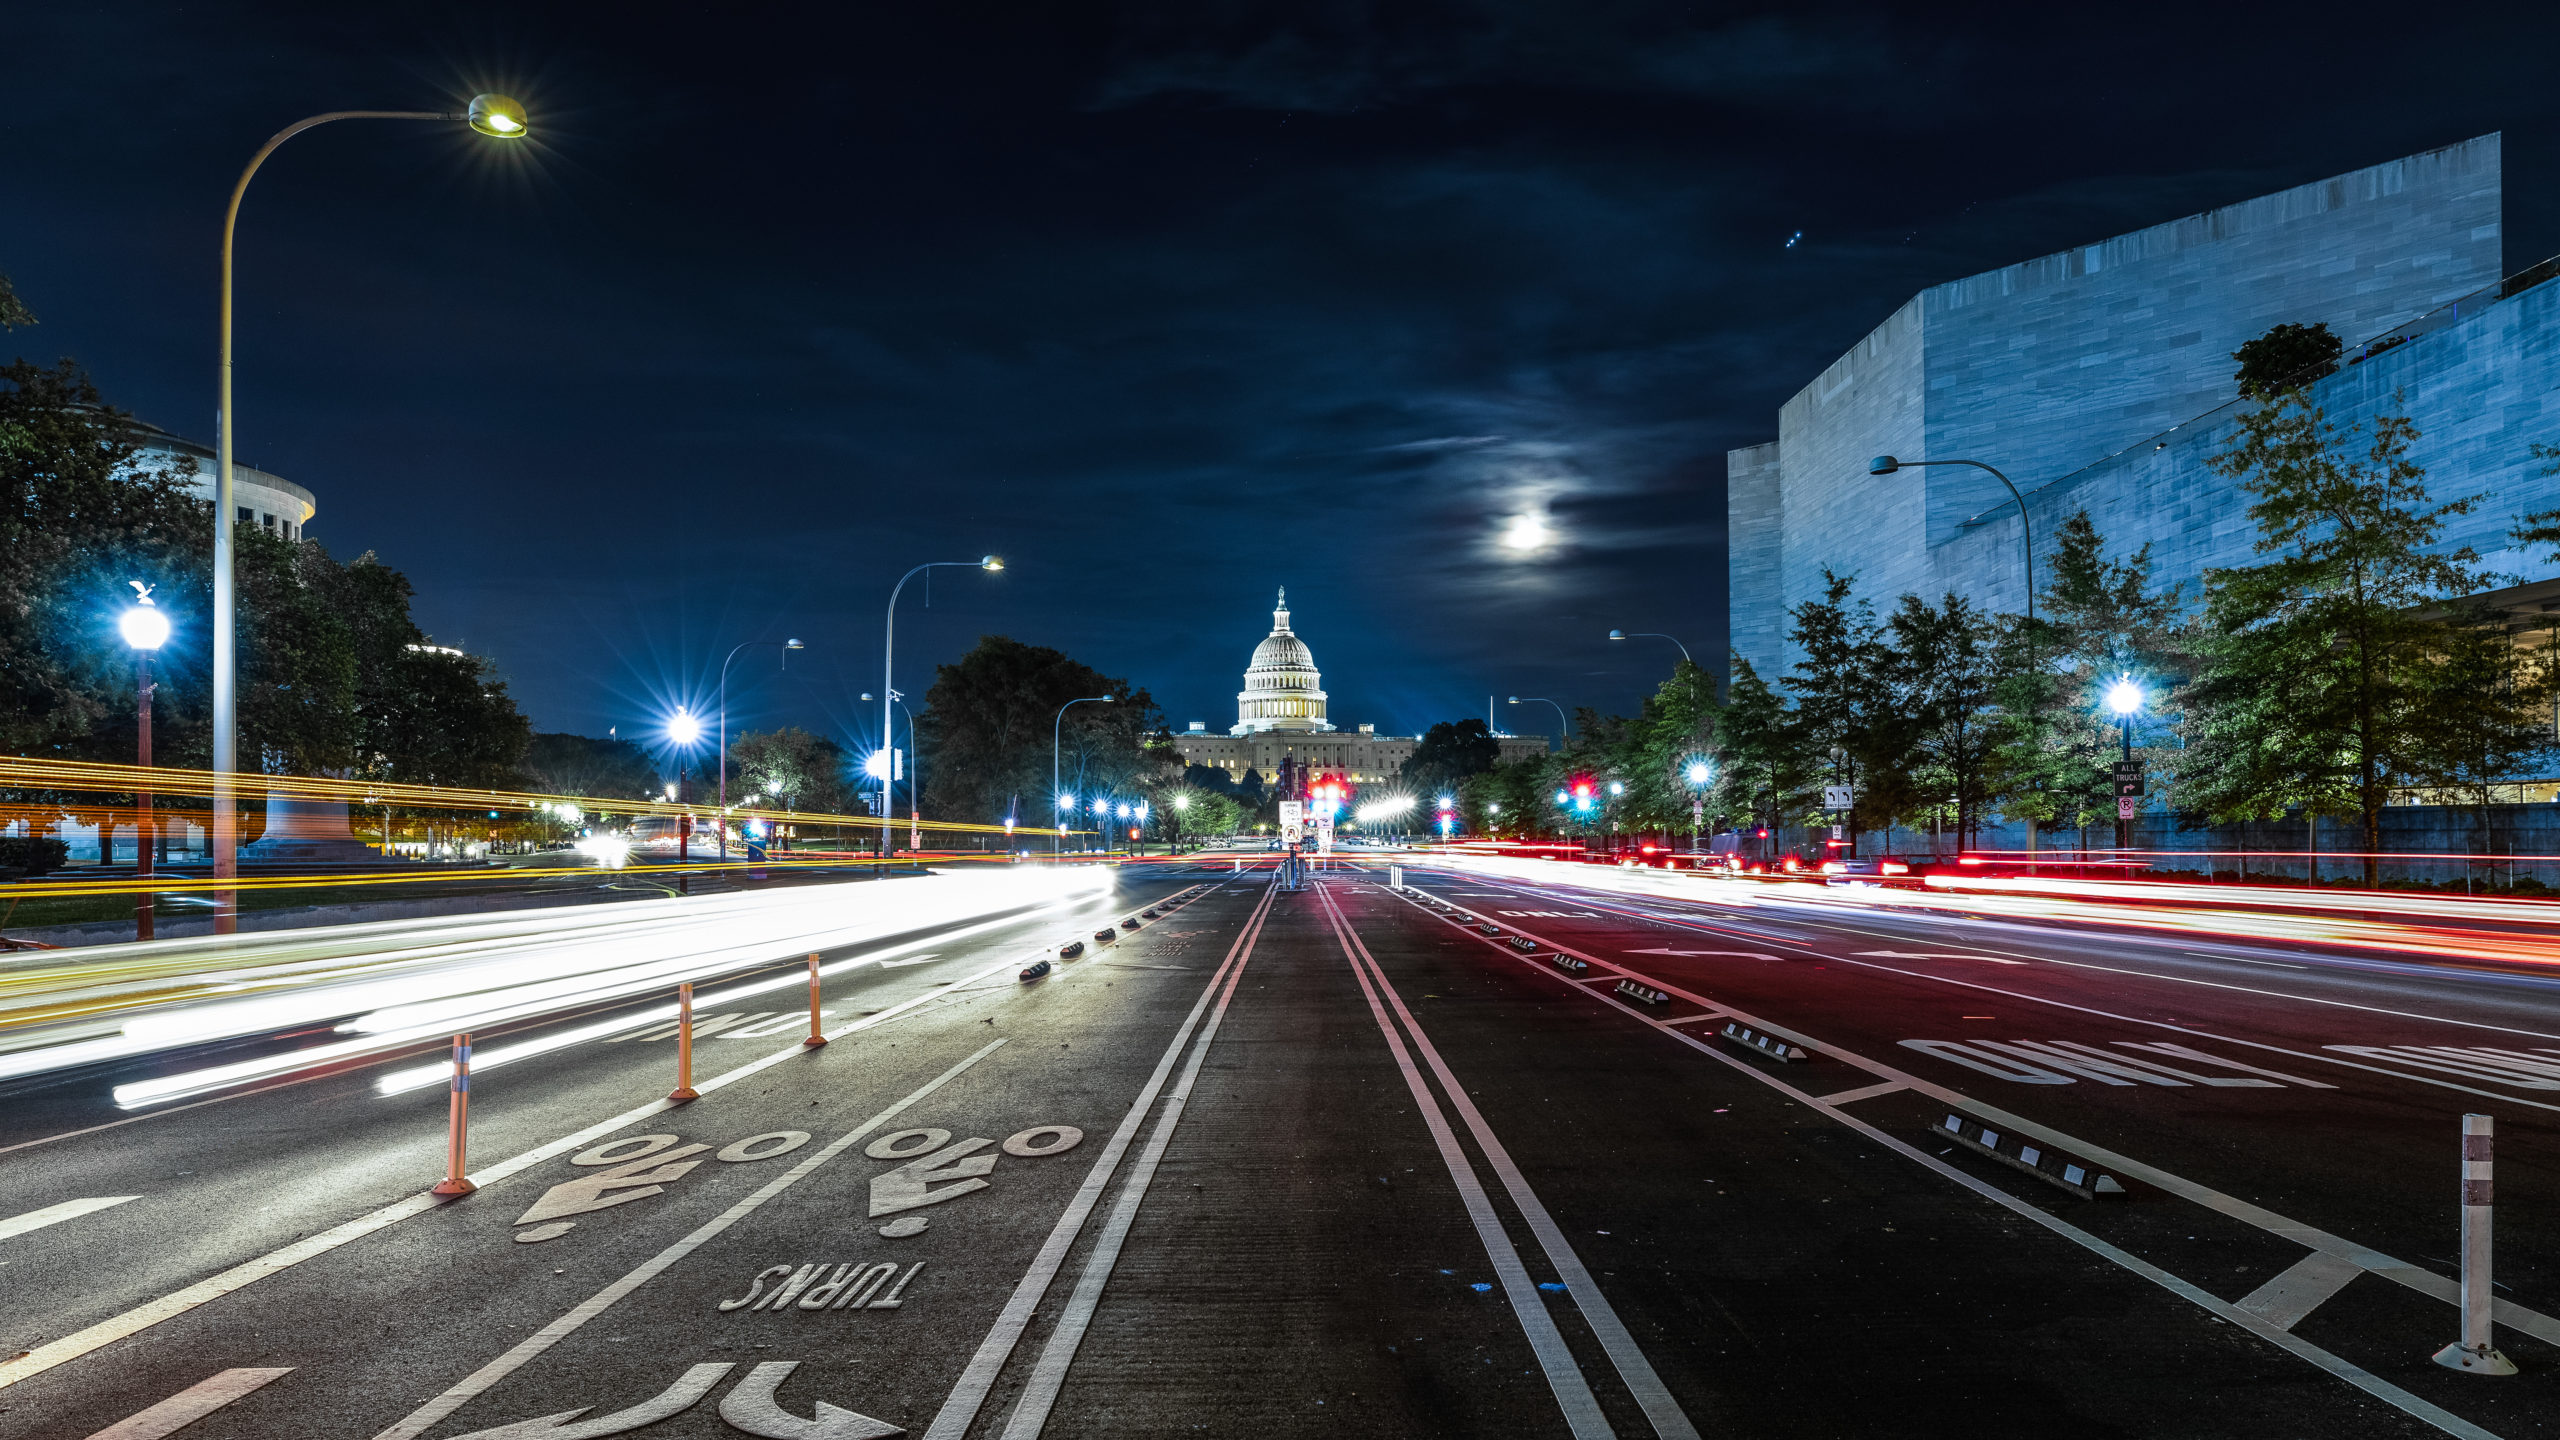 Washington DC Pictures at Night (Photography Inspiration)